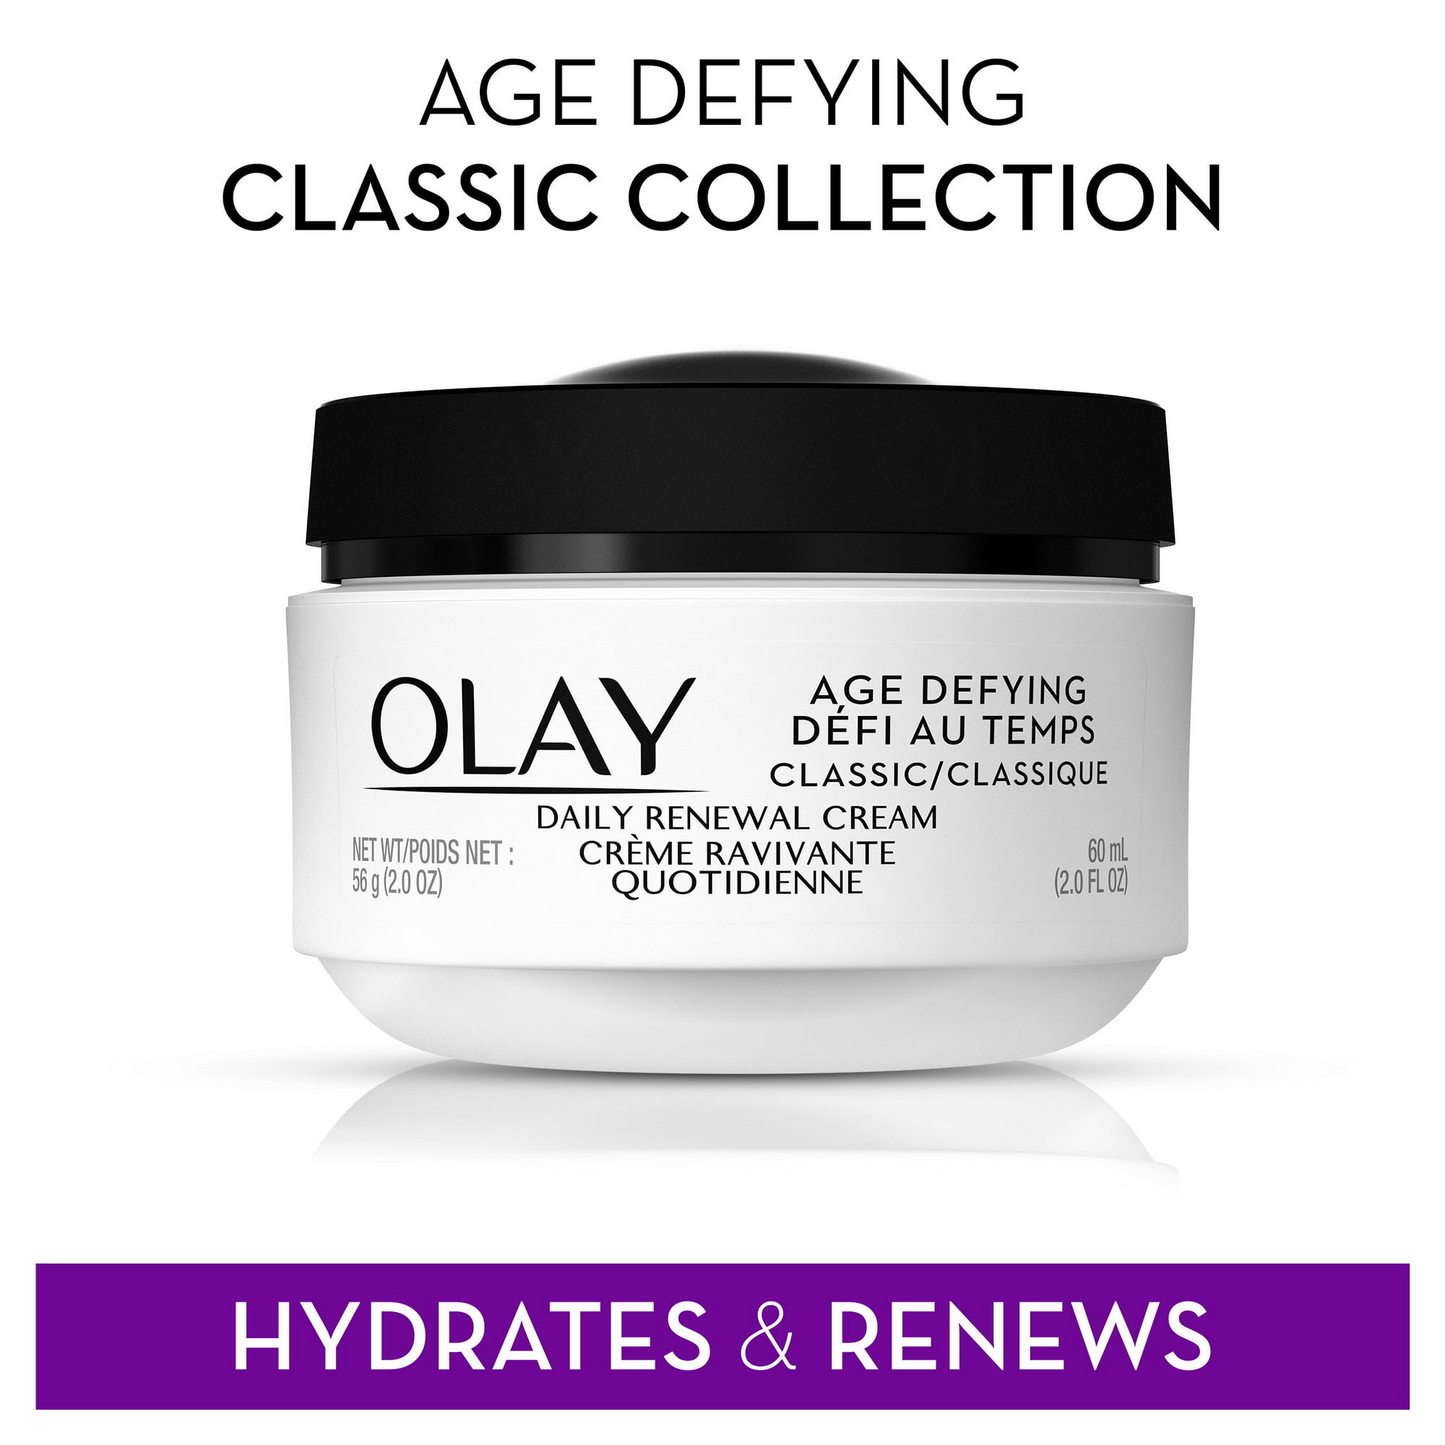 Olay Age Defying Classic Daily Renewal Cream, Face Moisturizer for Dull Combination Skin, 2.0 fl oz